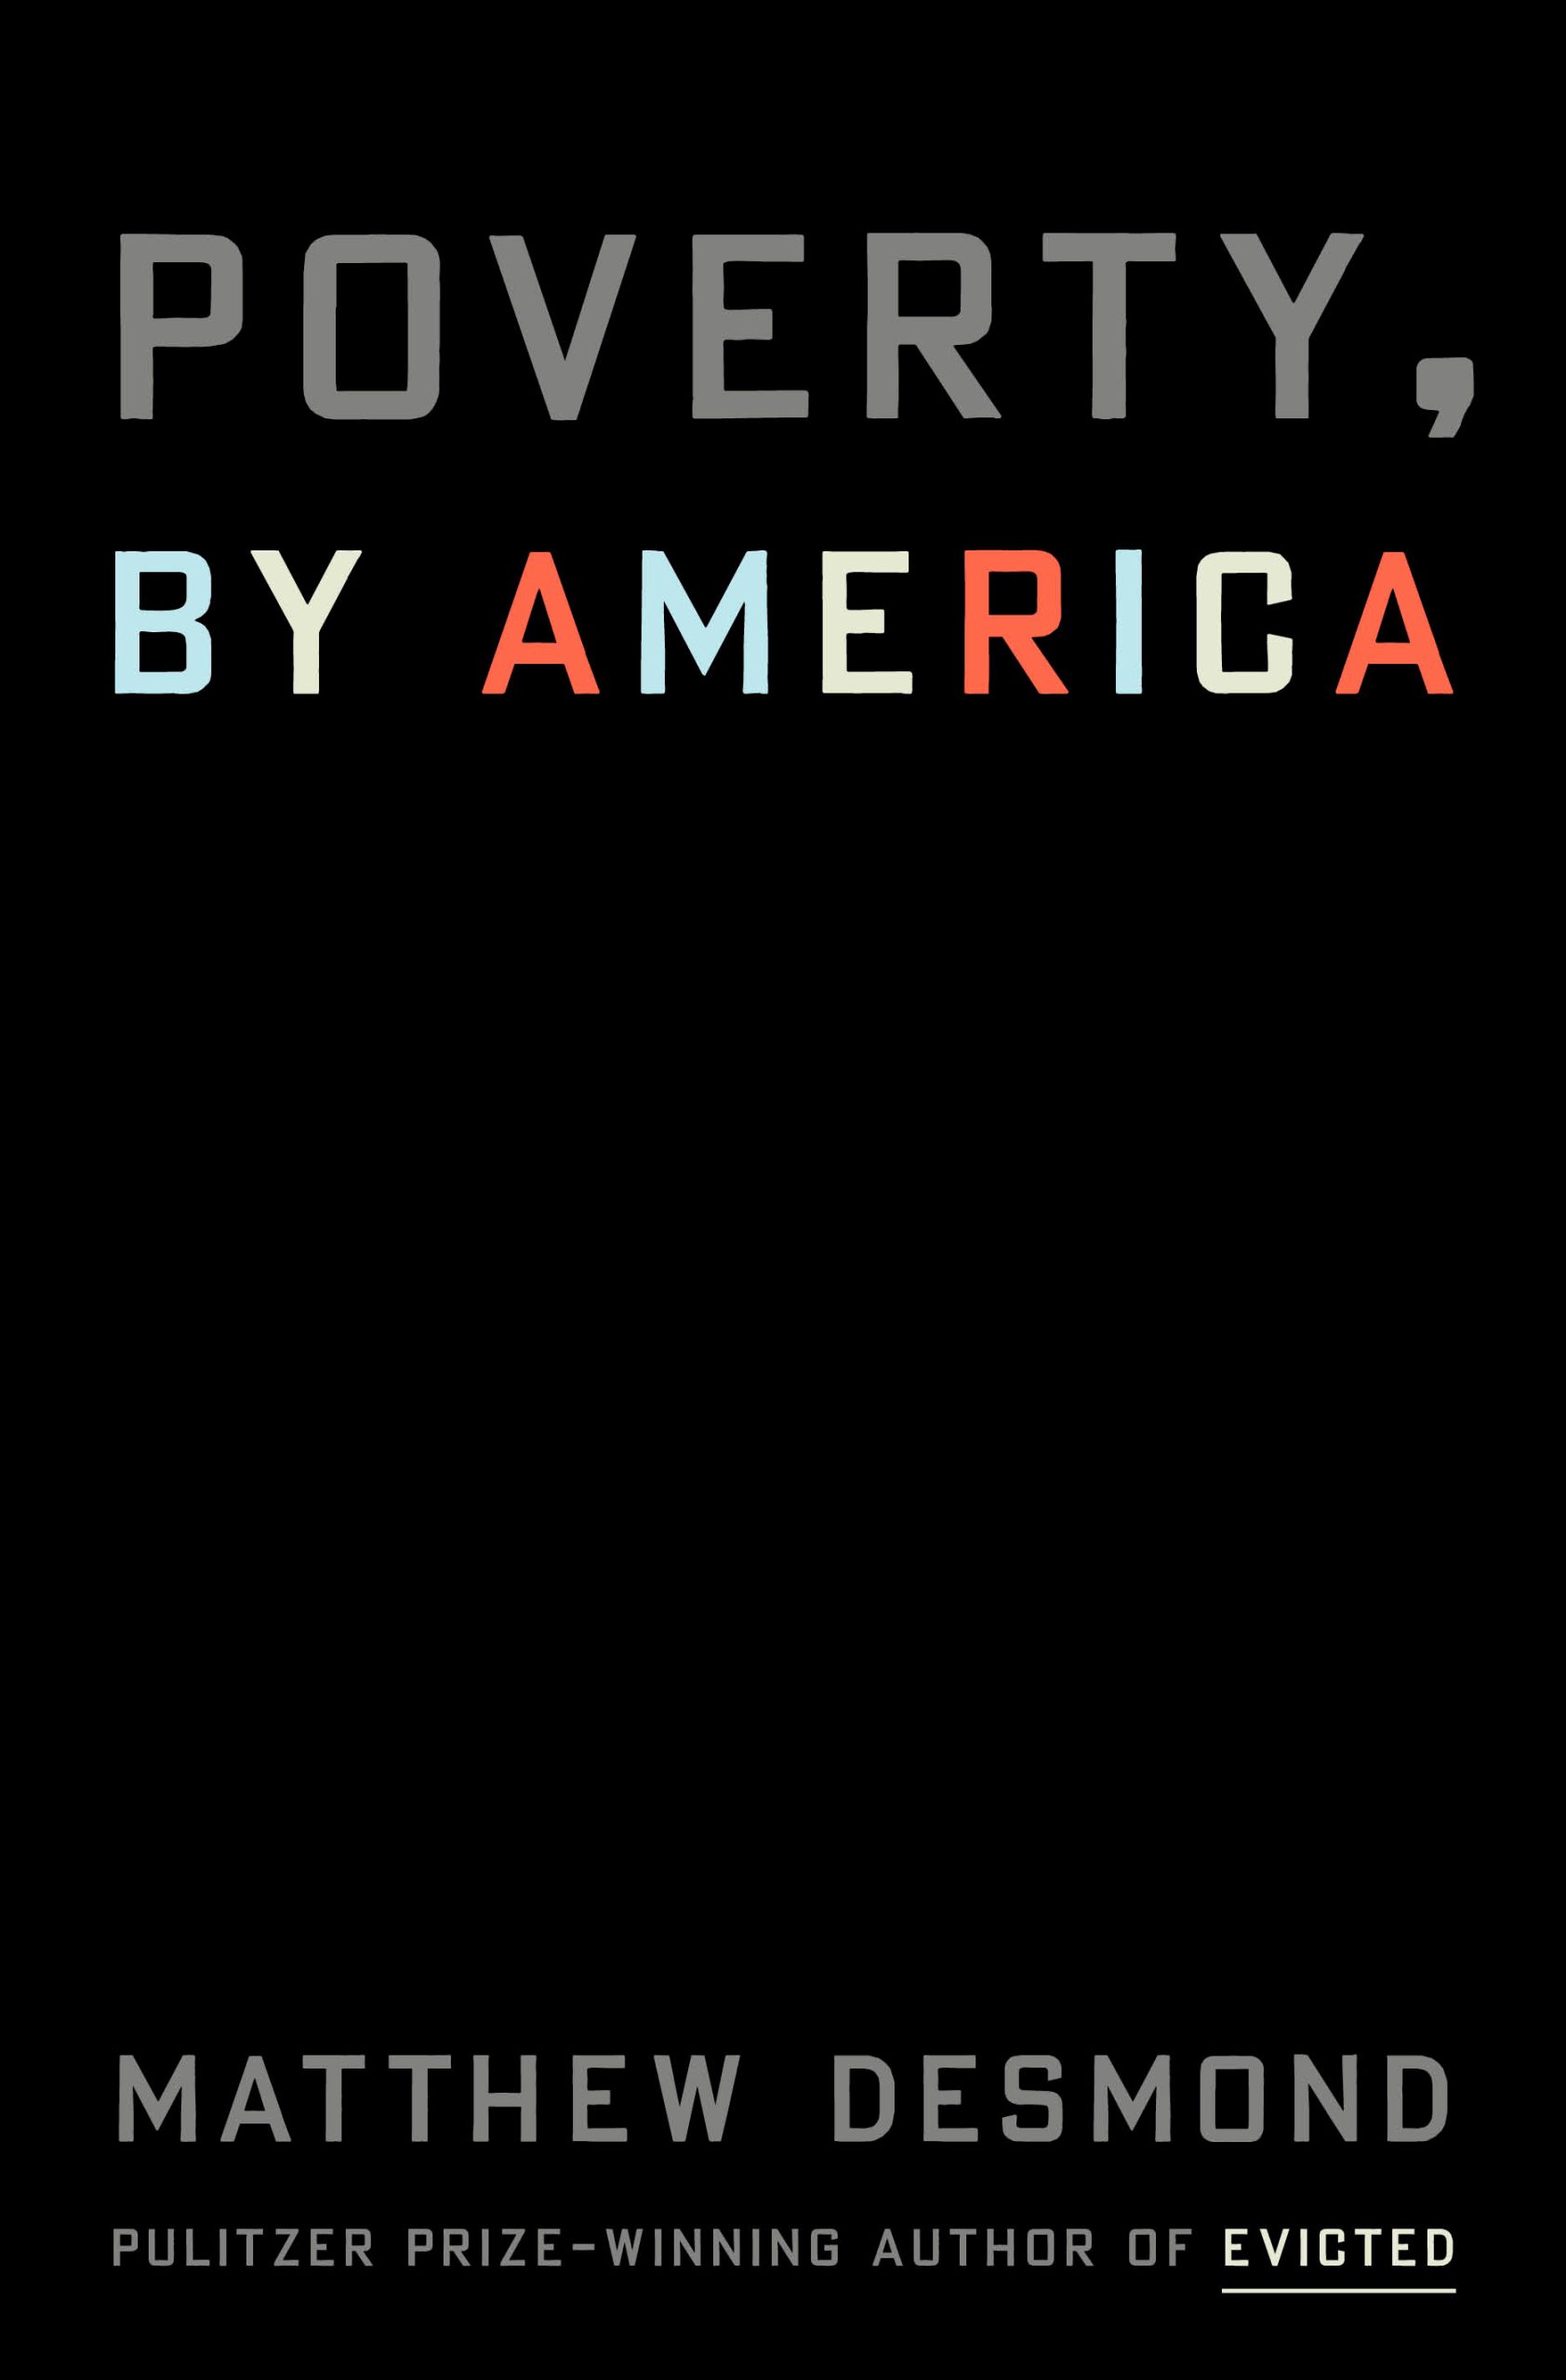 poverty, by america book cover